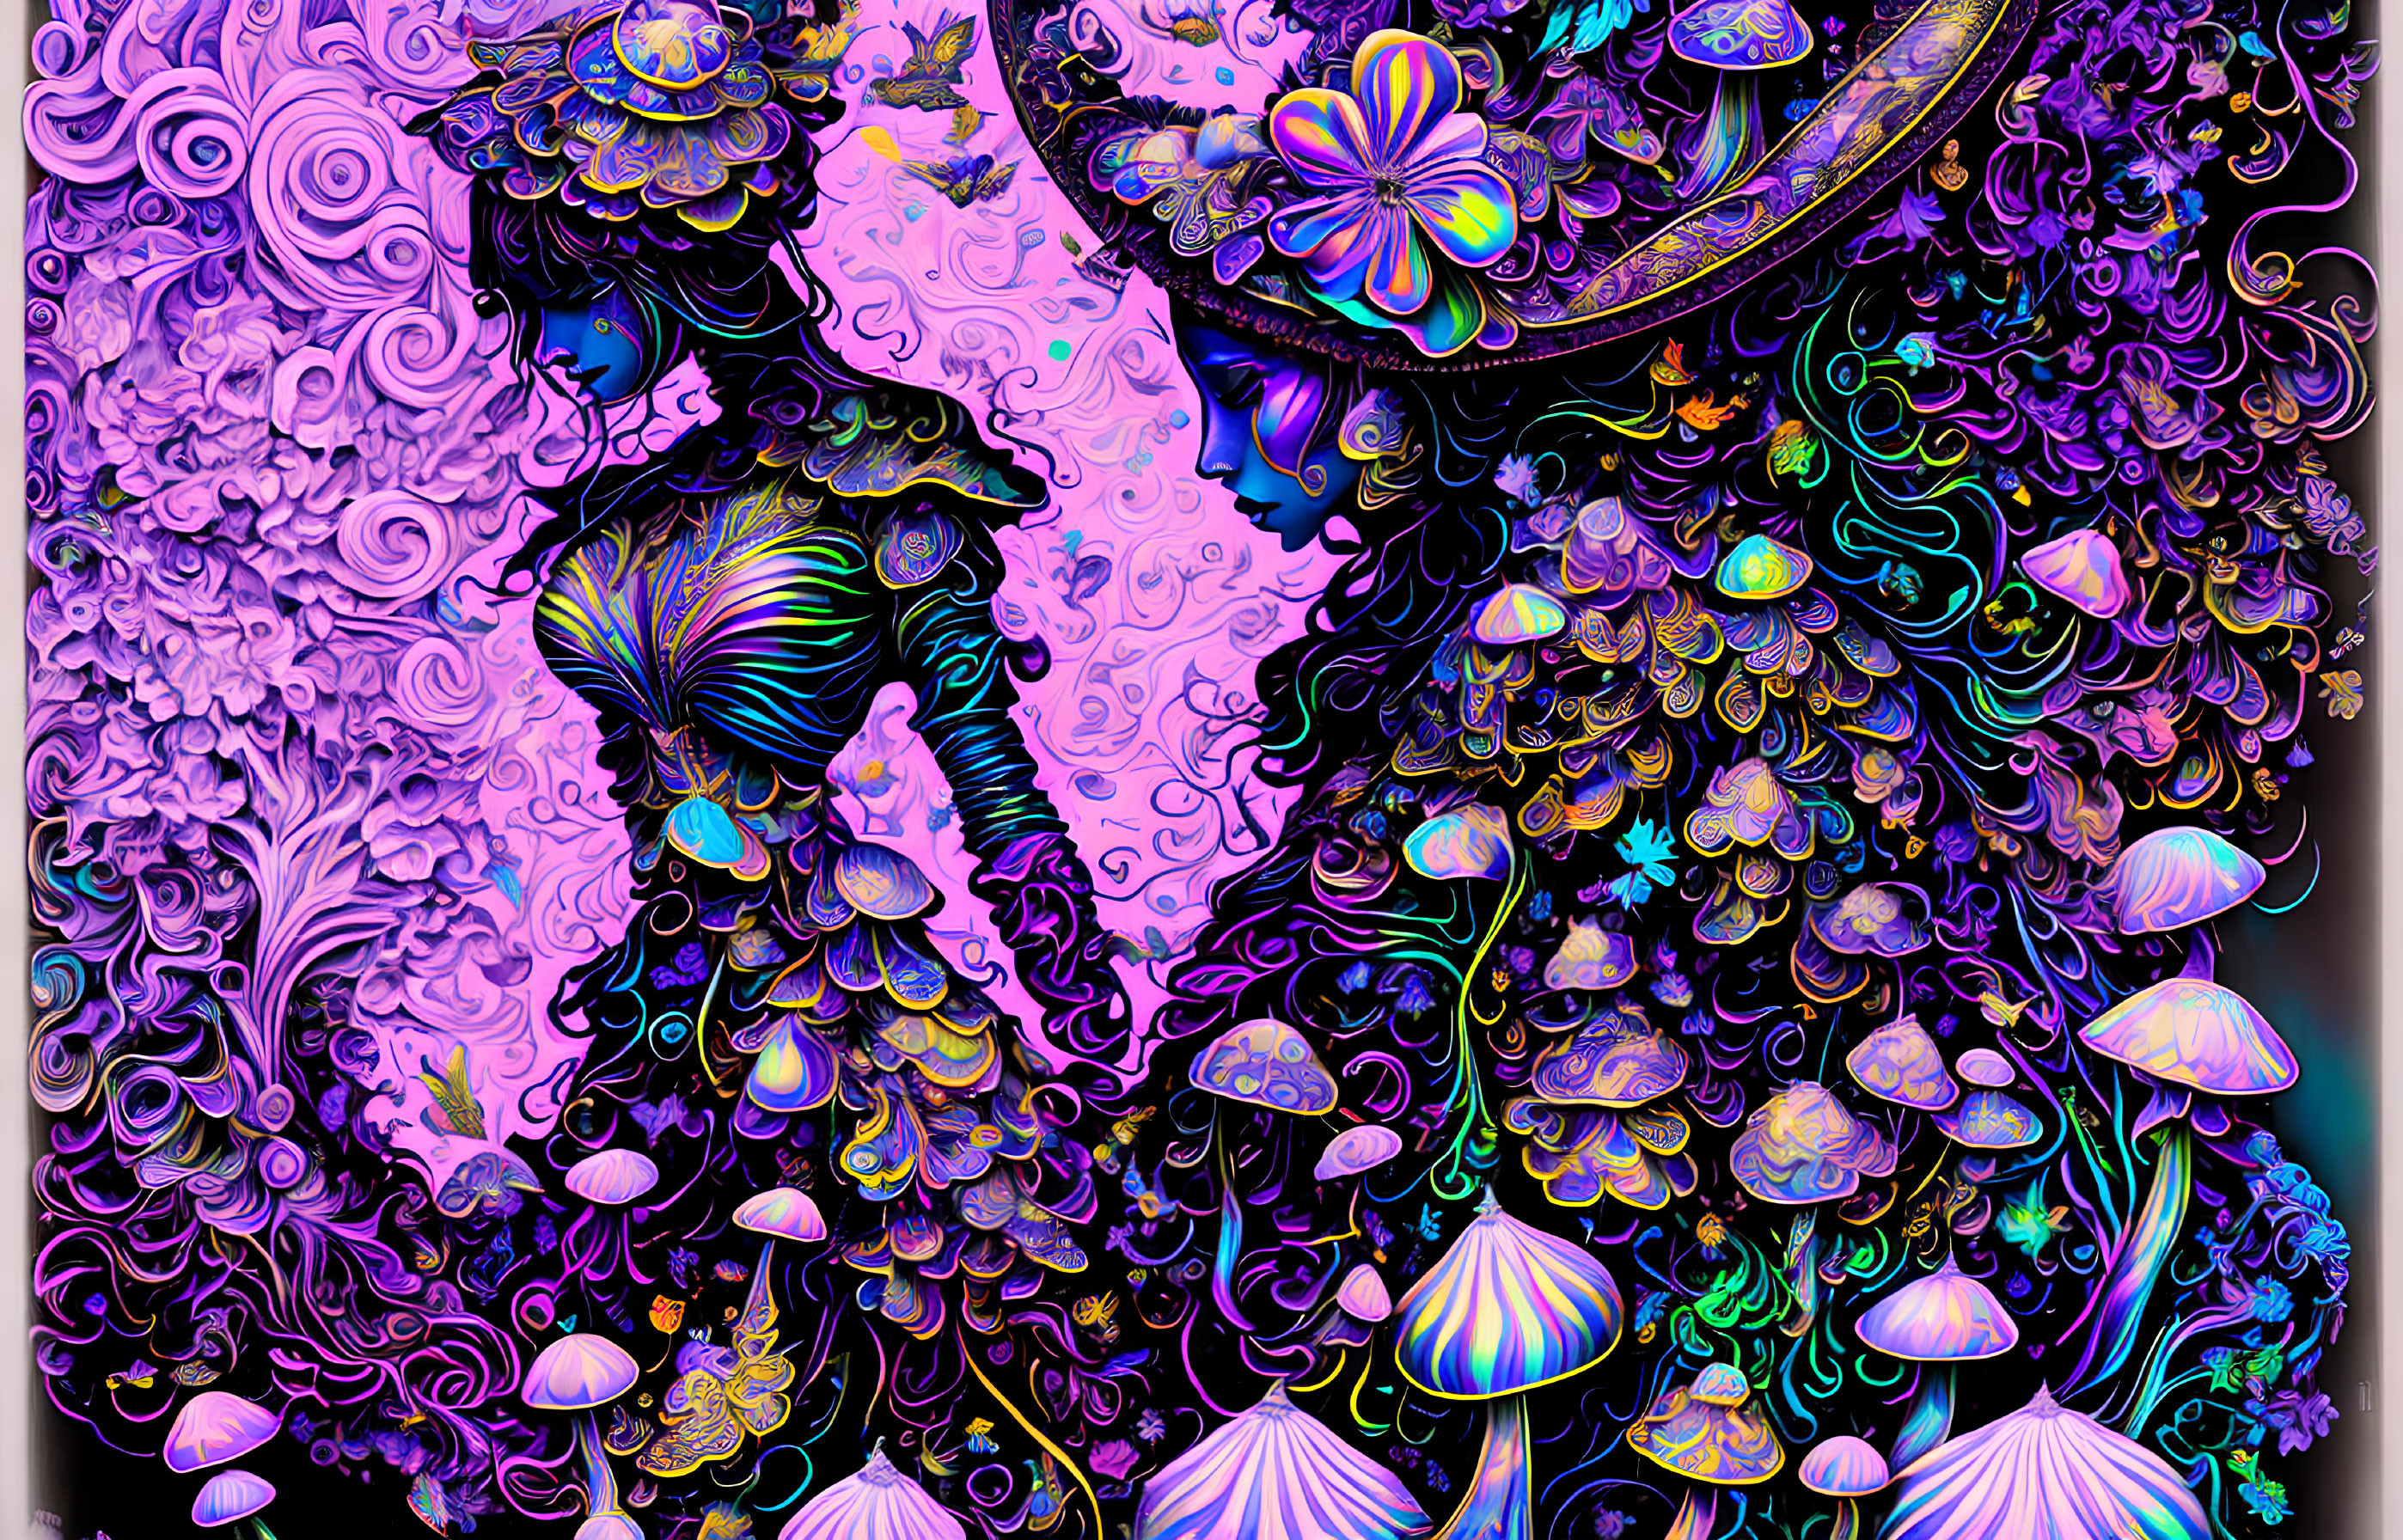 Colorful Psychedelic Artwork: Two Figures with Mushroom and Nature Motifs